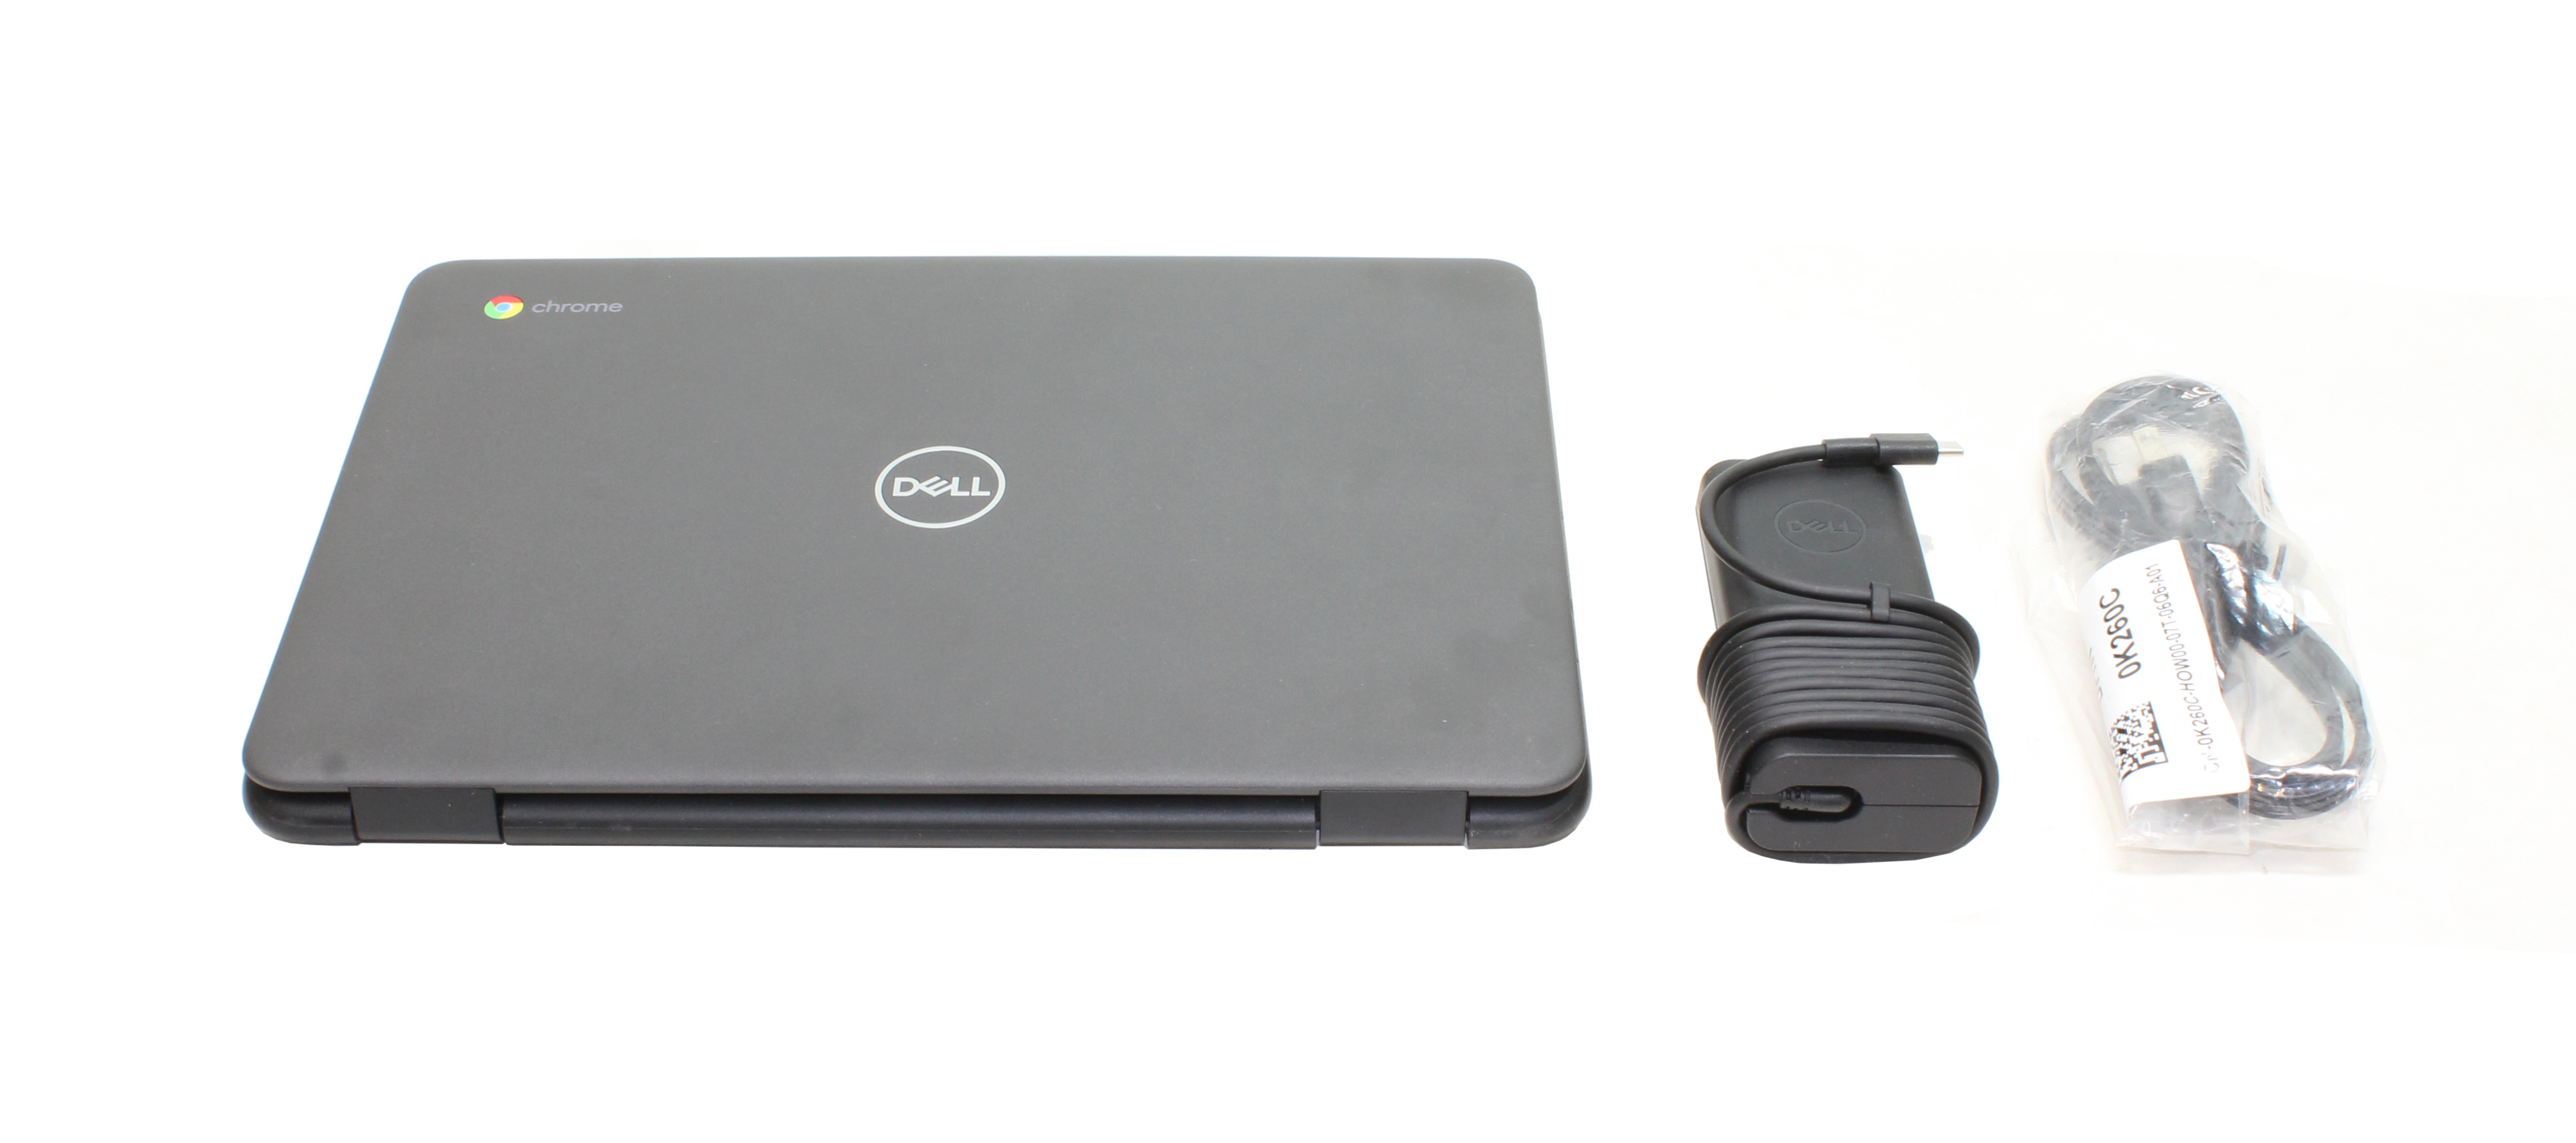 Dell Chromebook 3100  Intel Celeron N4020  GHz eMMC 16Gb RAM 4Gb  P29T001 [P29T001] - $ : Professional Multi Monitor Workstations,  Graphics Card Experts